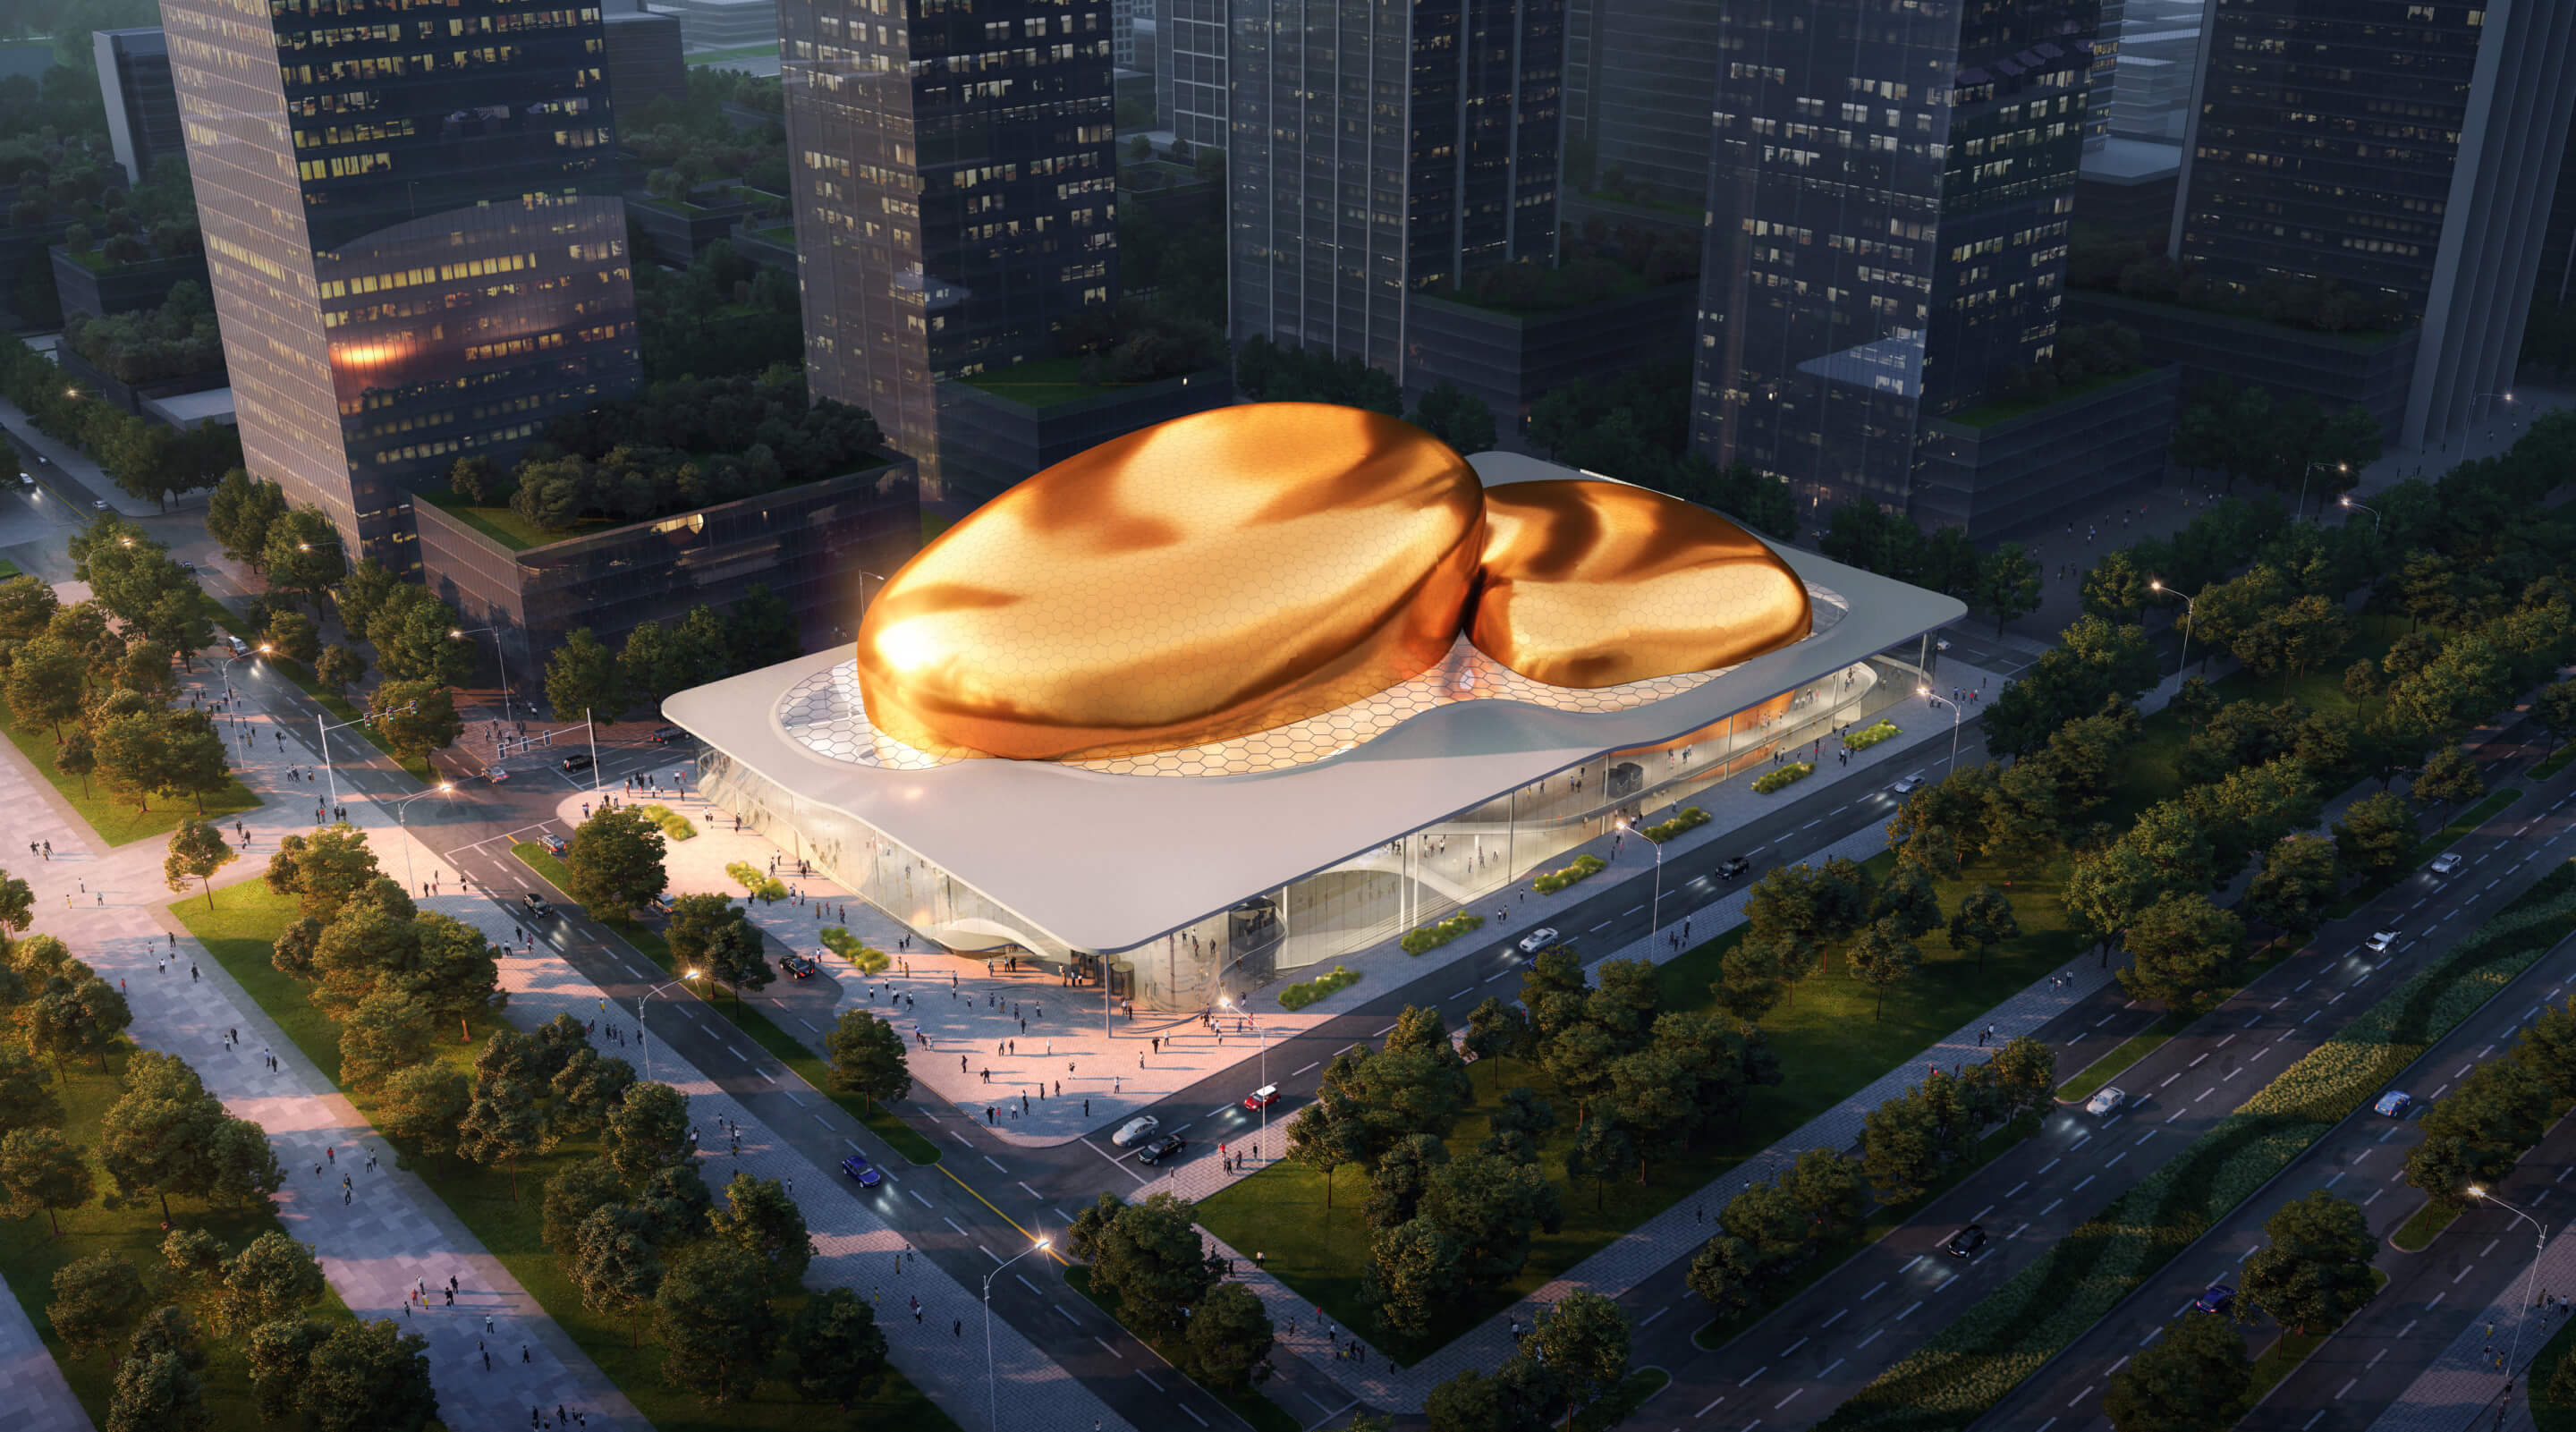 rendering of a bulbous golden concert hall